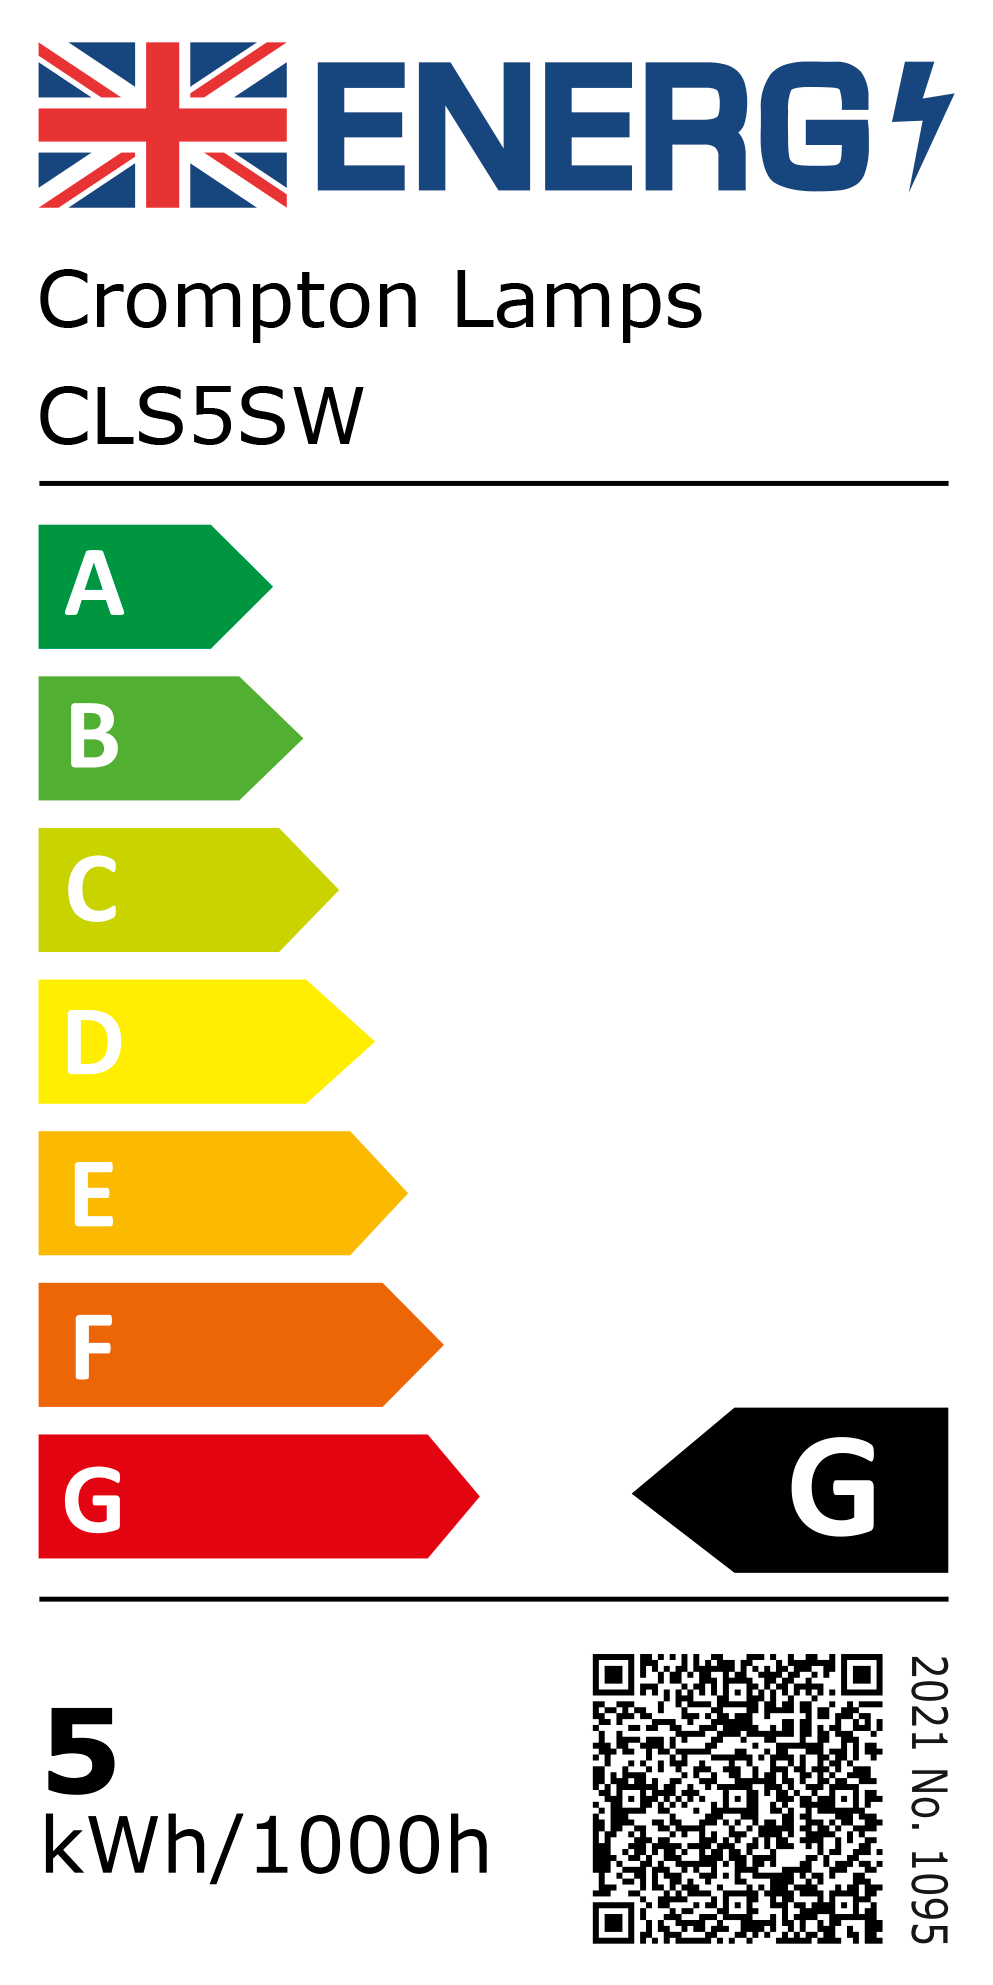 New 2021 Energy Rating Label: Stock Code CLS5SW